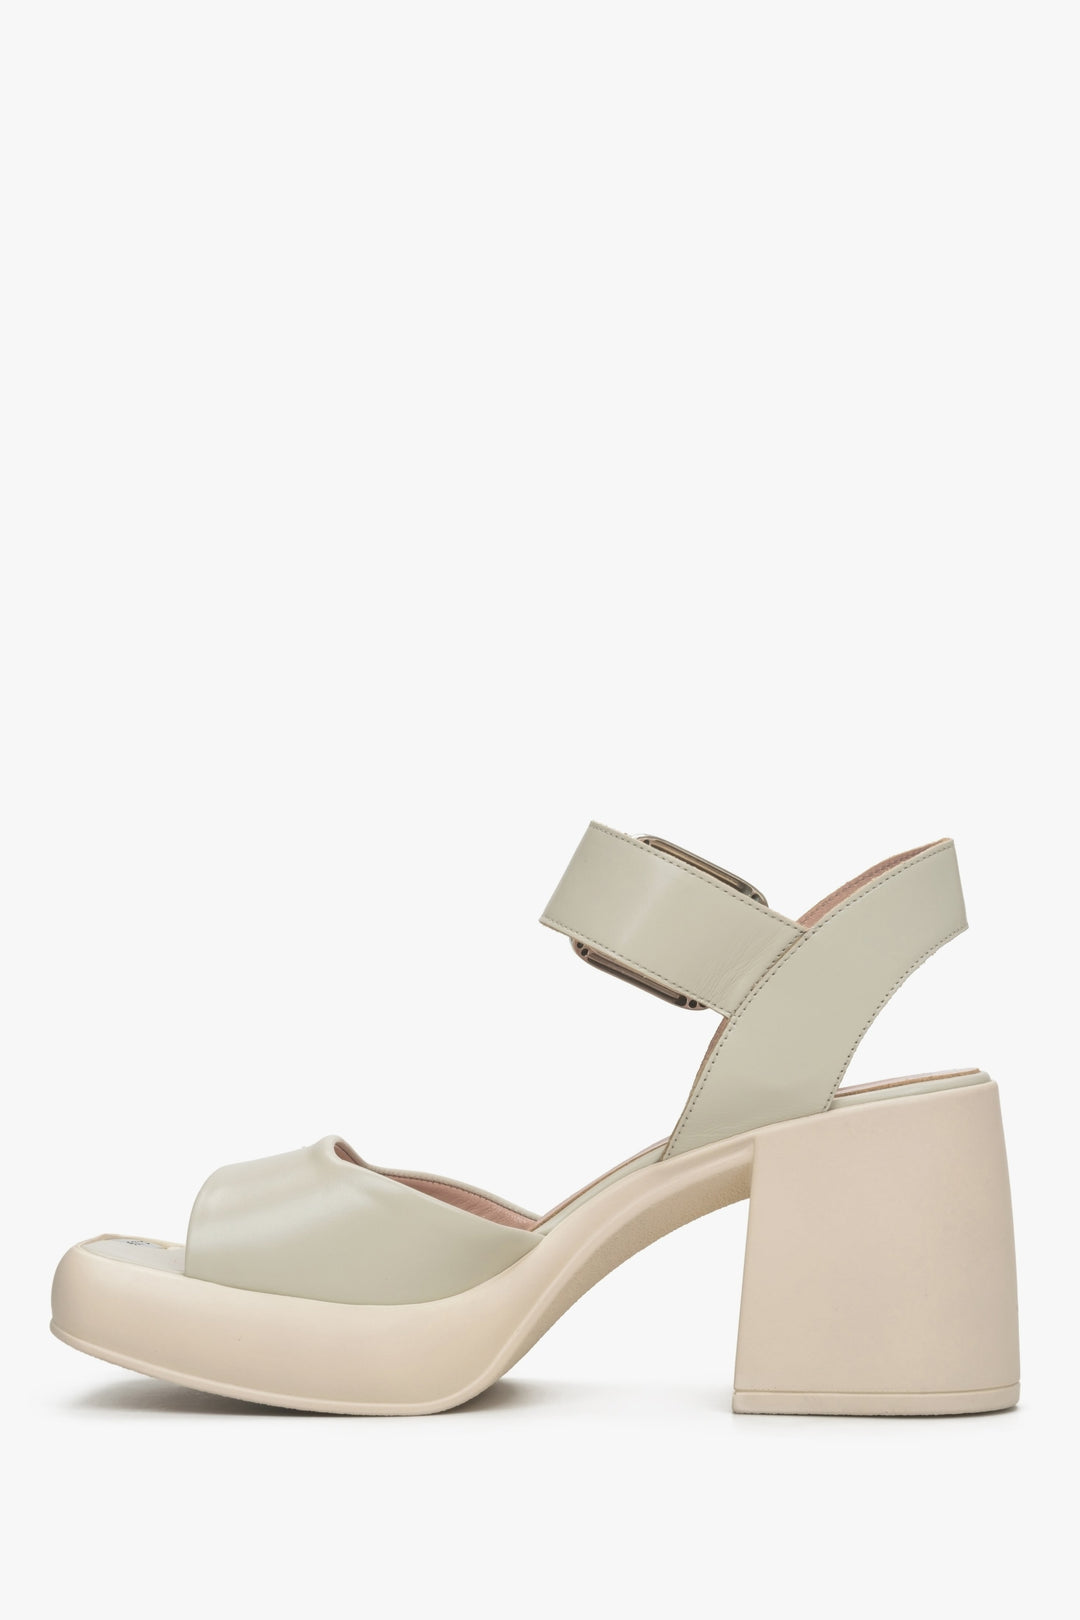 Stylish women's beige-grey sandals with a stable block heel by Estro - shoe profile.